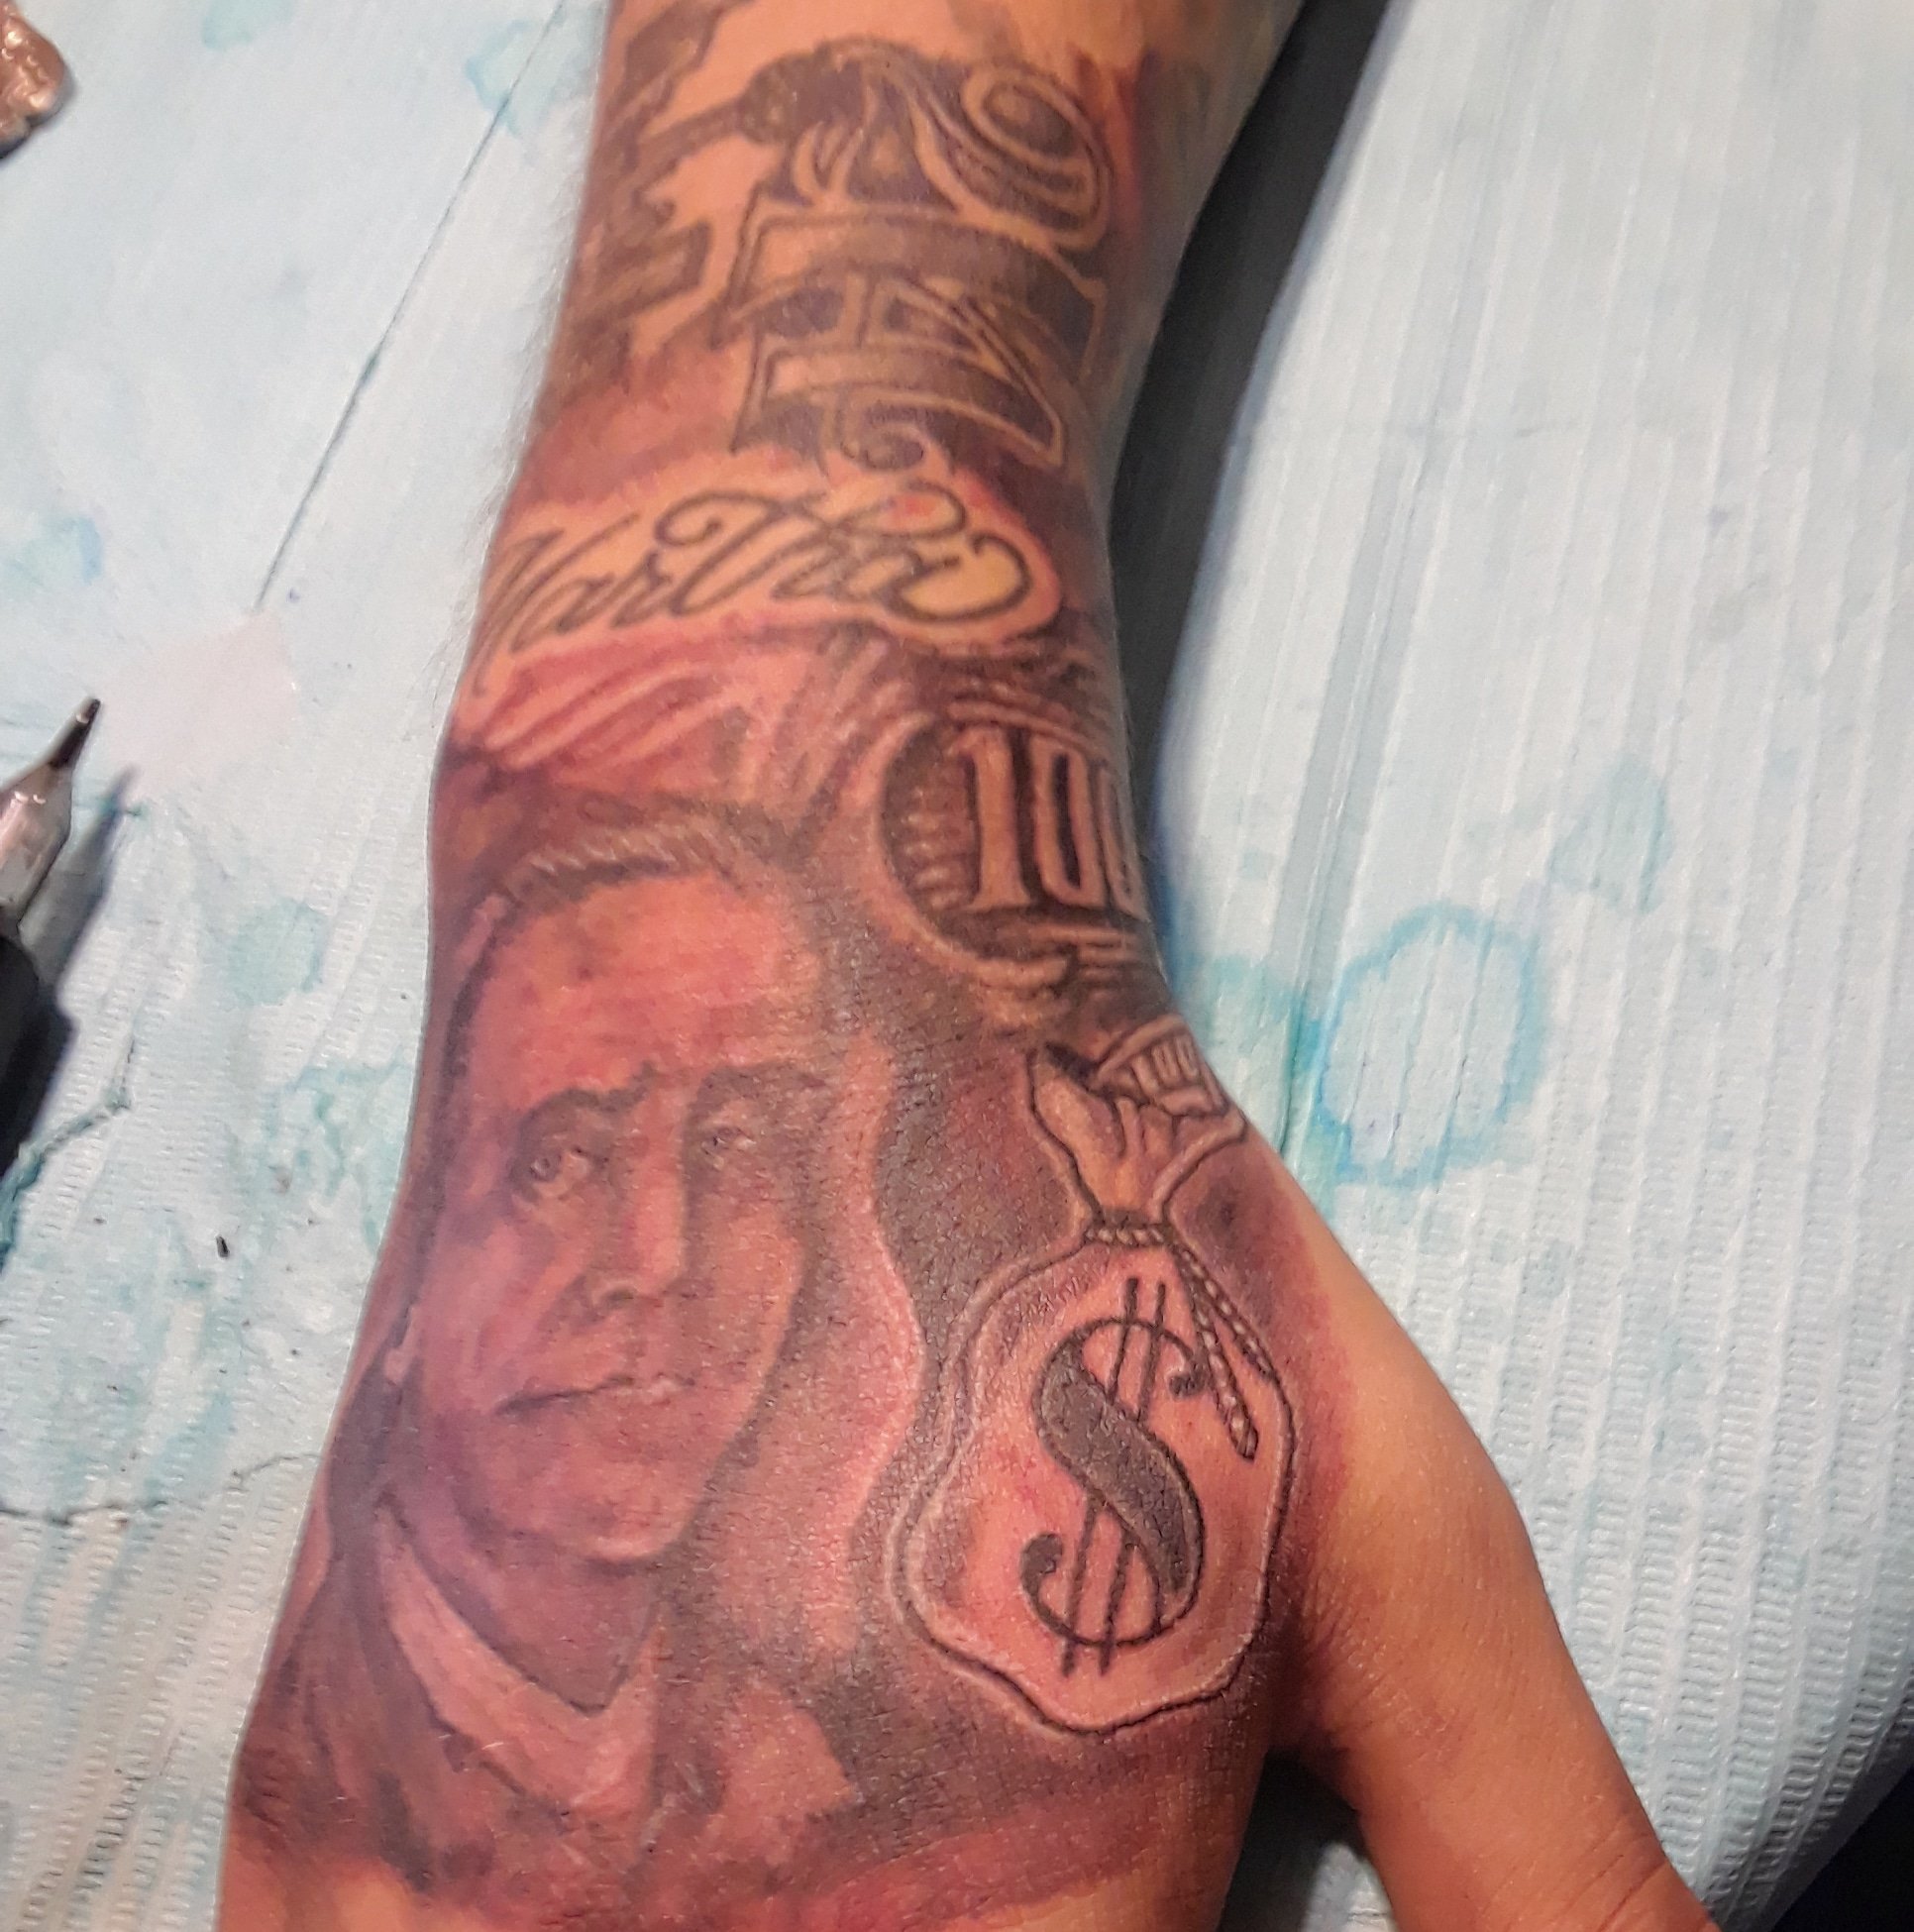 Tattoo by Dwayne  Freehand money bags  On the homie purugreeny more  please roadtoriches moneybags keepitpushing nevernotworking  thinkrichgrowrich stuckatwork  Facebook